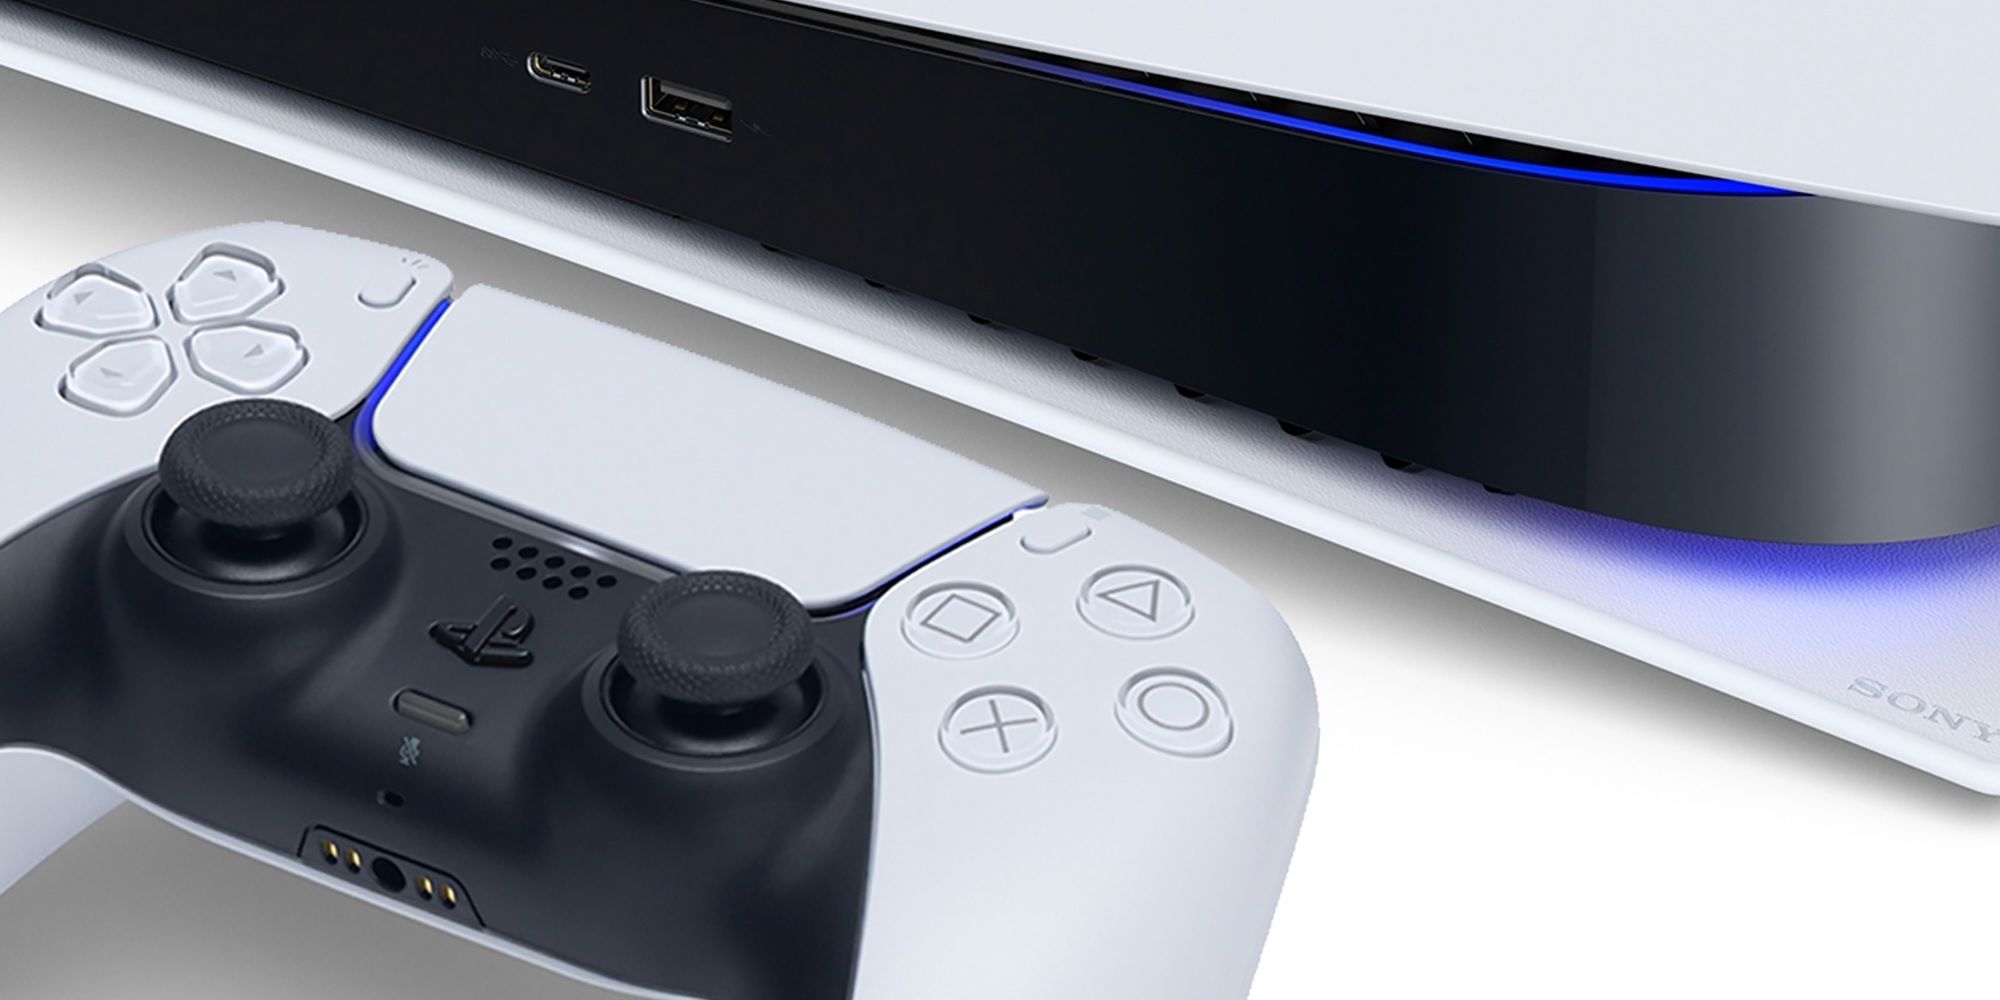 A promotional image of the PLayStation 5 console and DualSense controller.